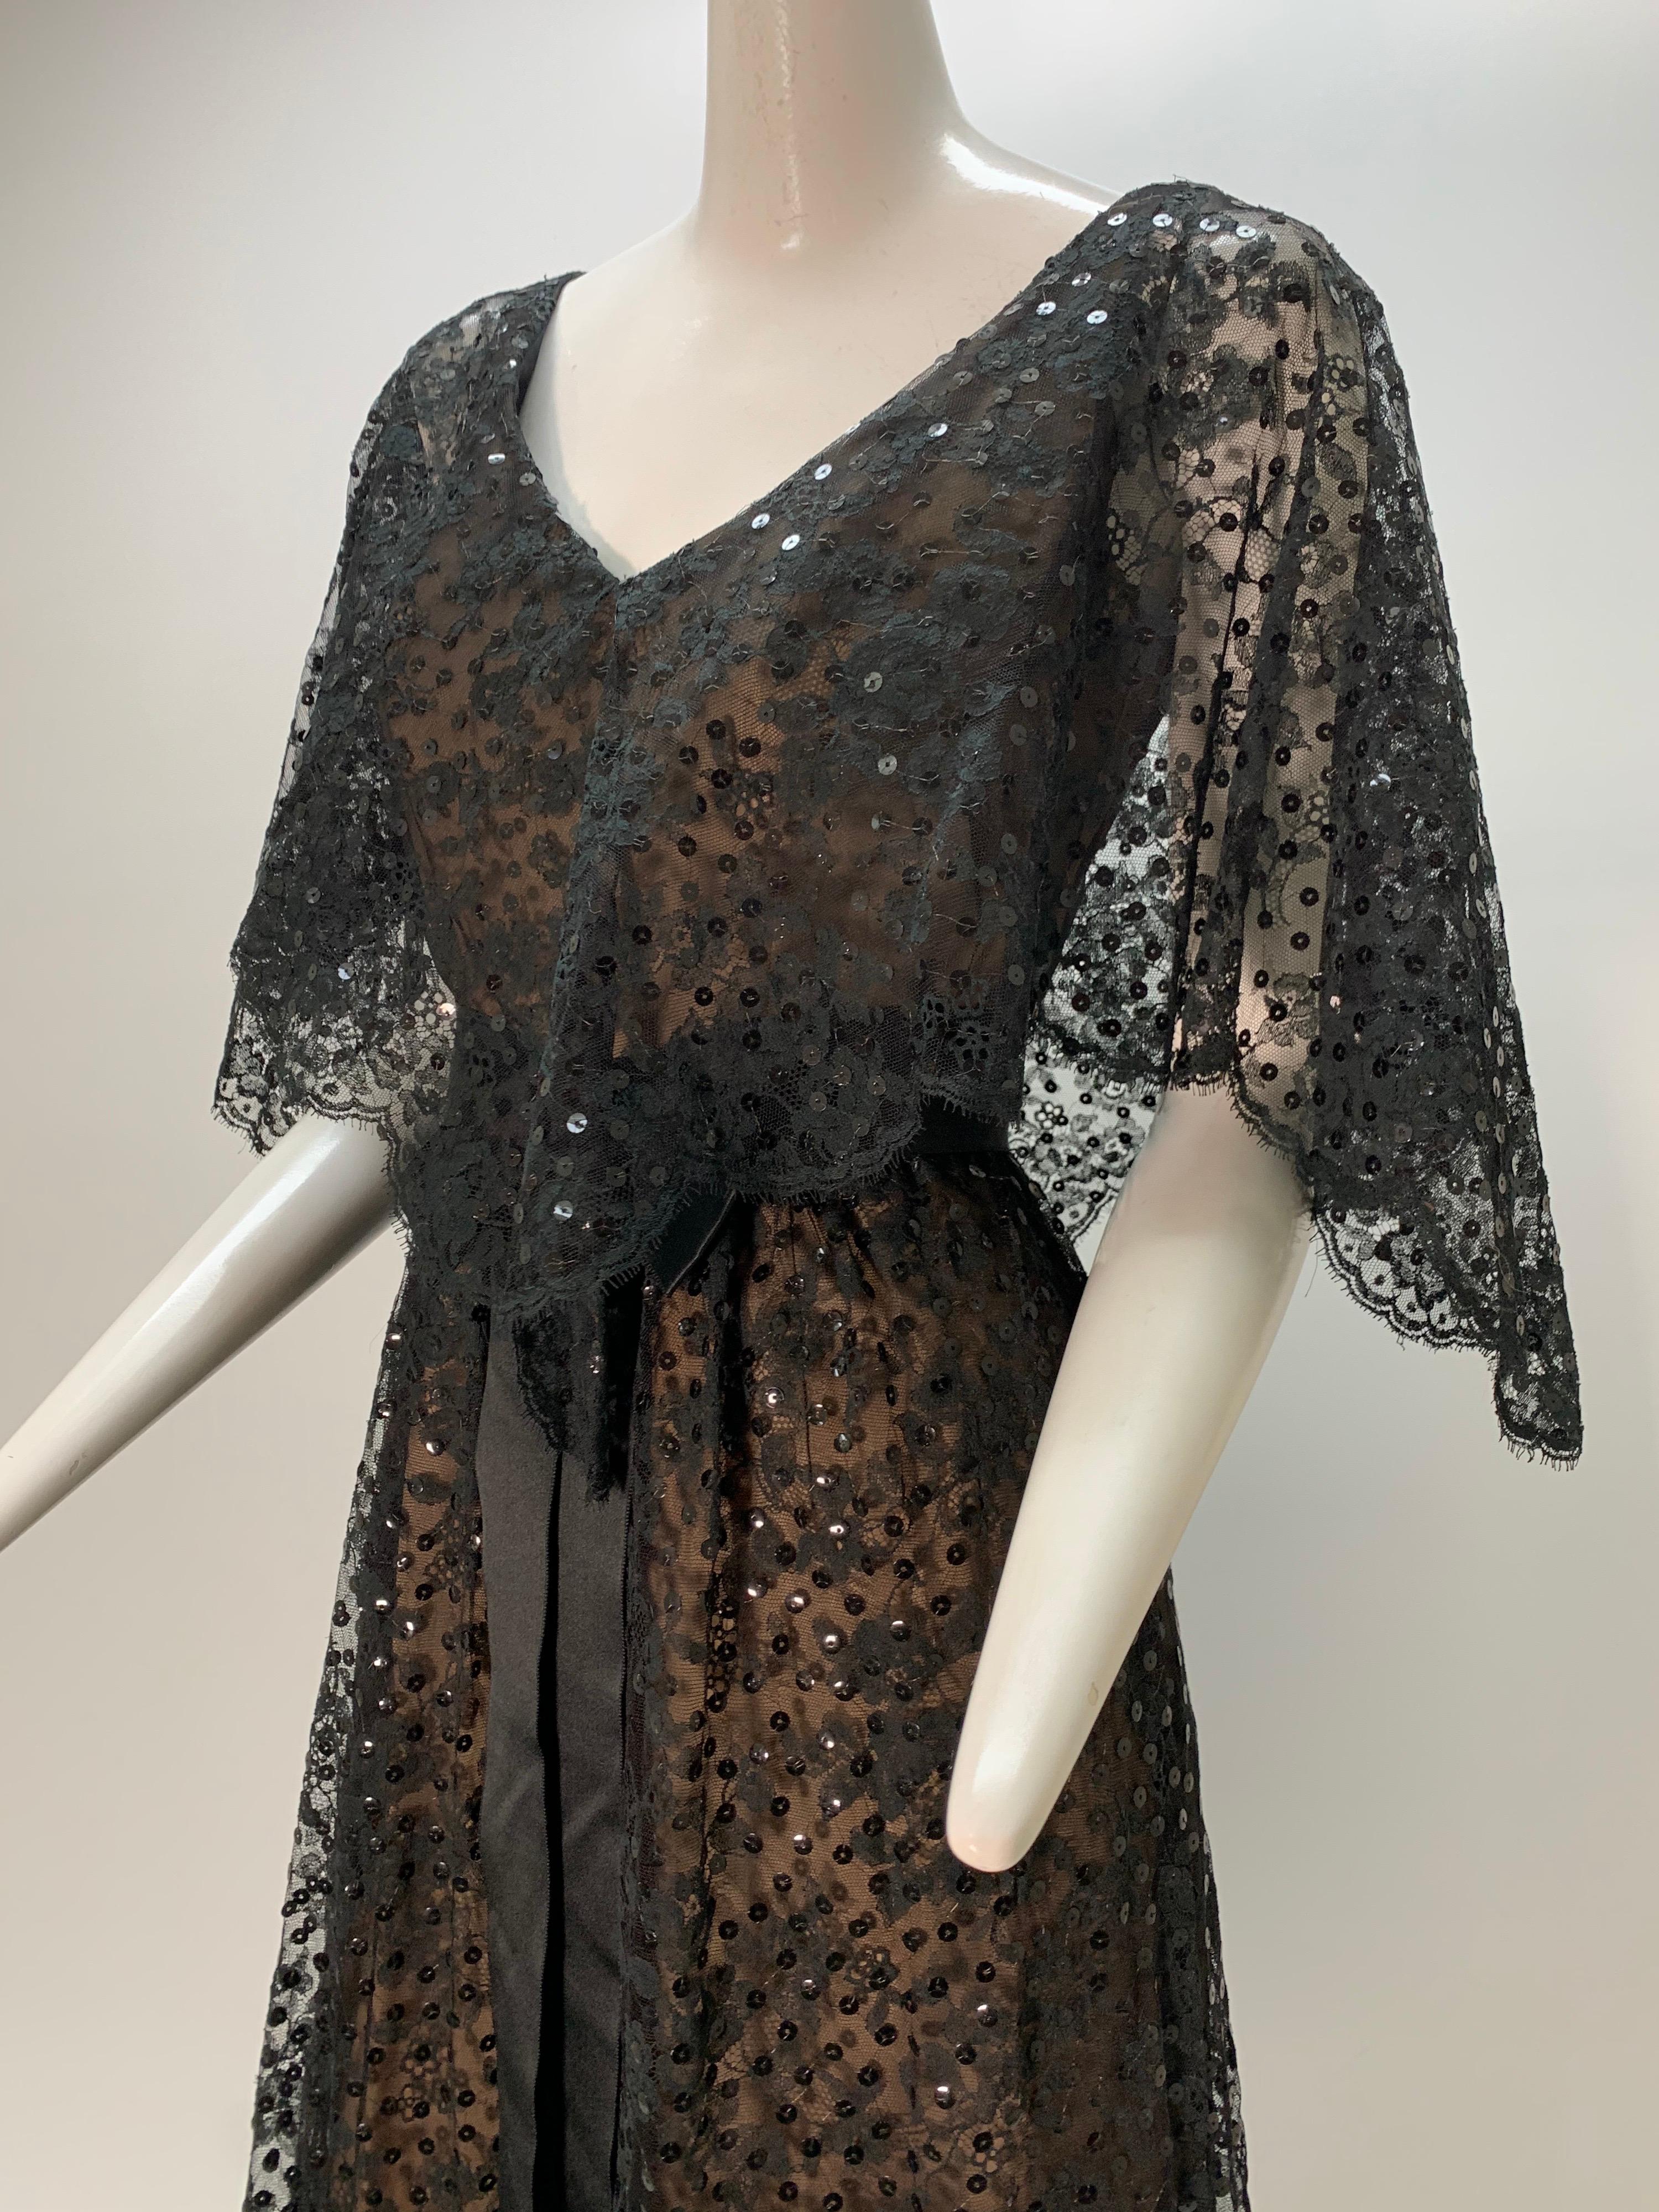 1960s Kiki Hart black lace and sequin nude illusion 1930s-inspired caplet gown with black silk satin ribbon belt. Fitted waist, fully lined.
 Fits up to a US size 6